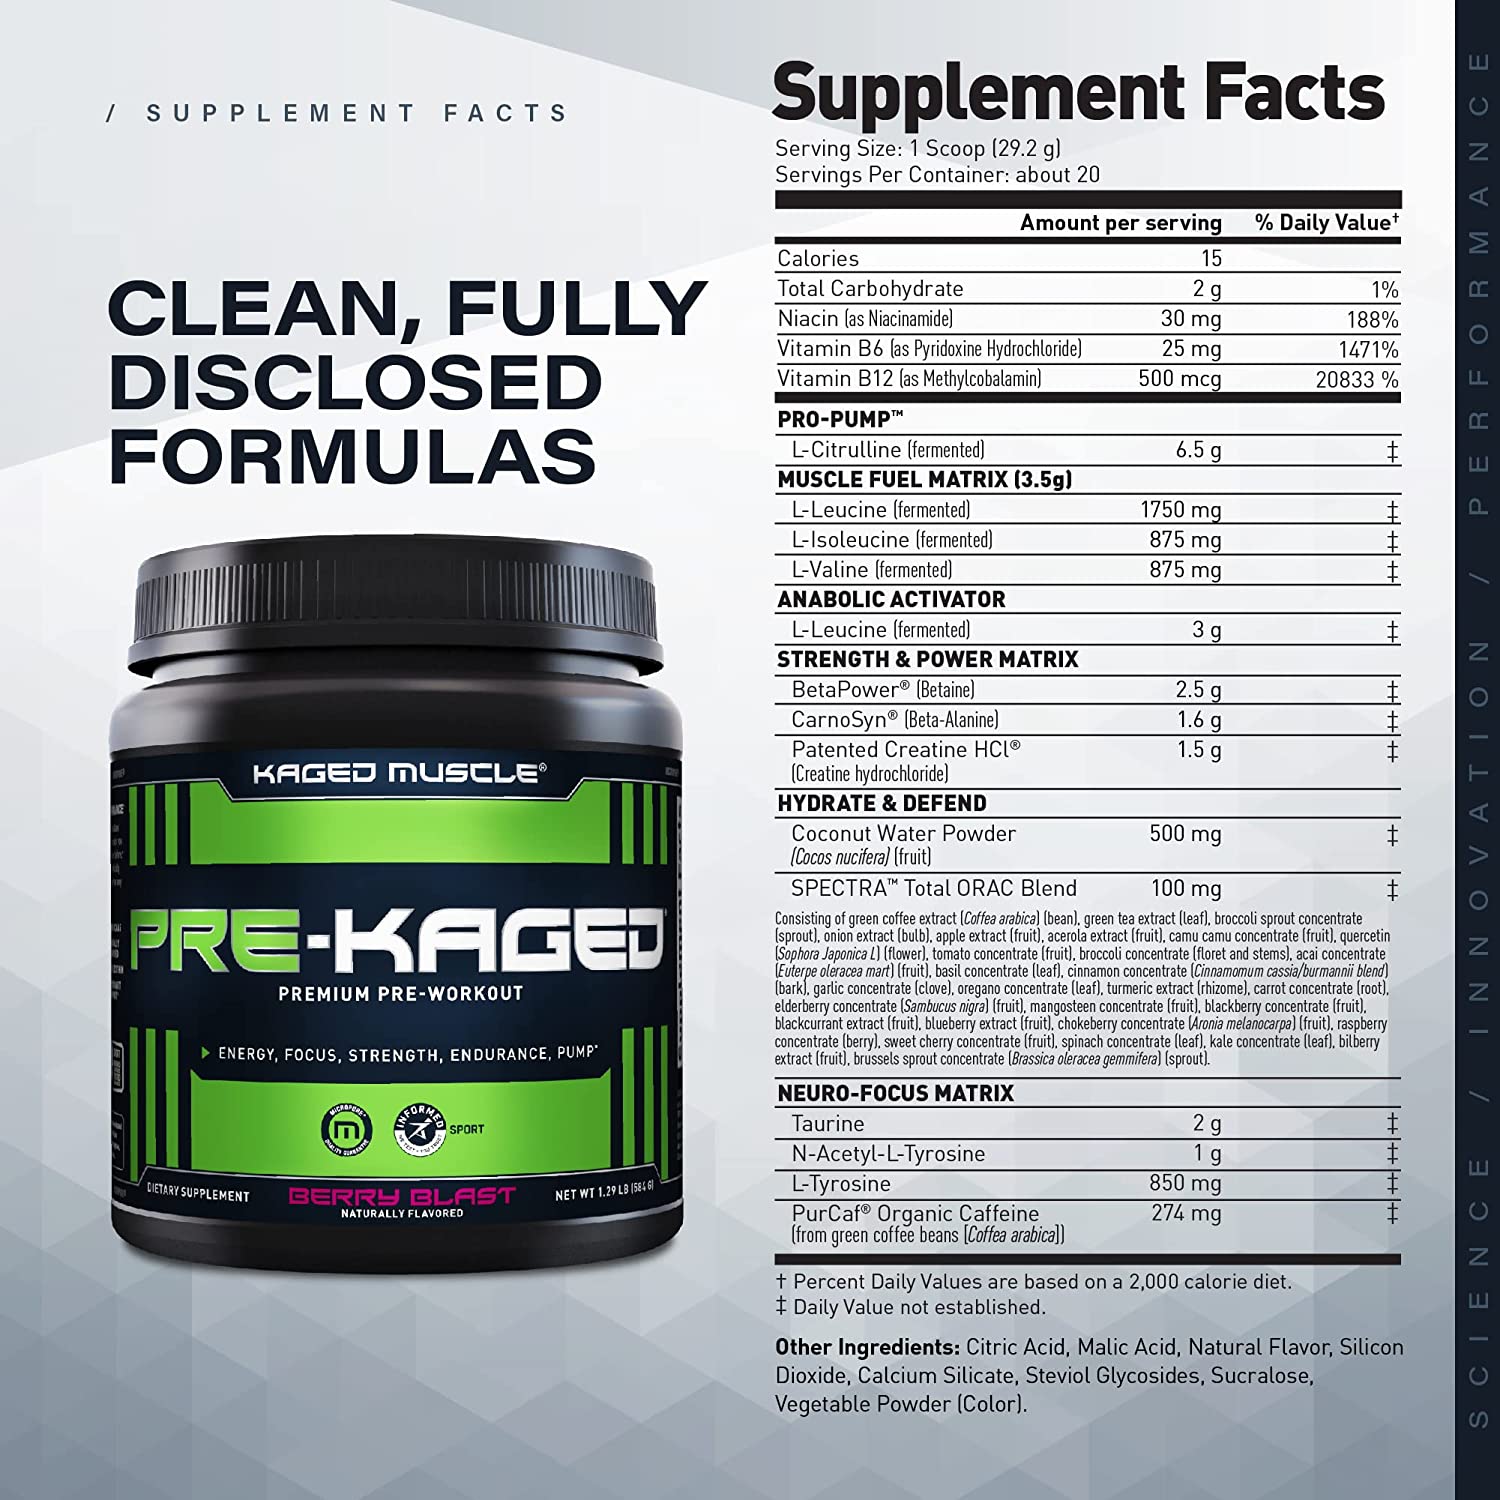 Kaged Muscle Pre-Workout Supplement Facts